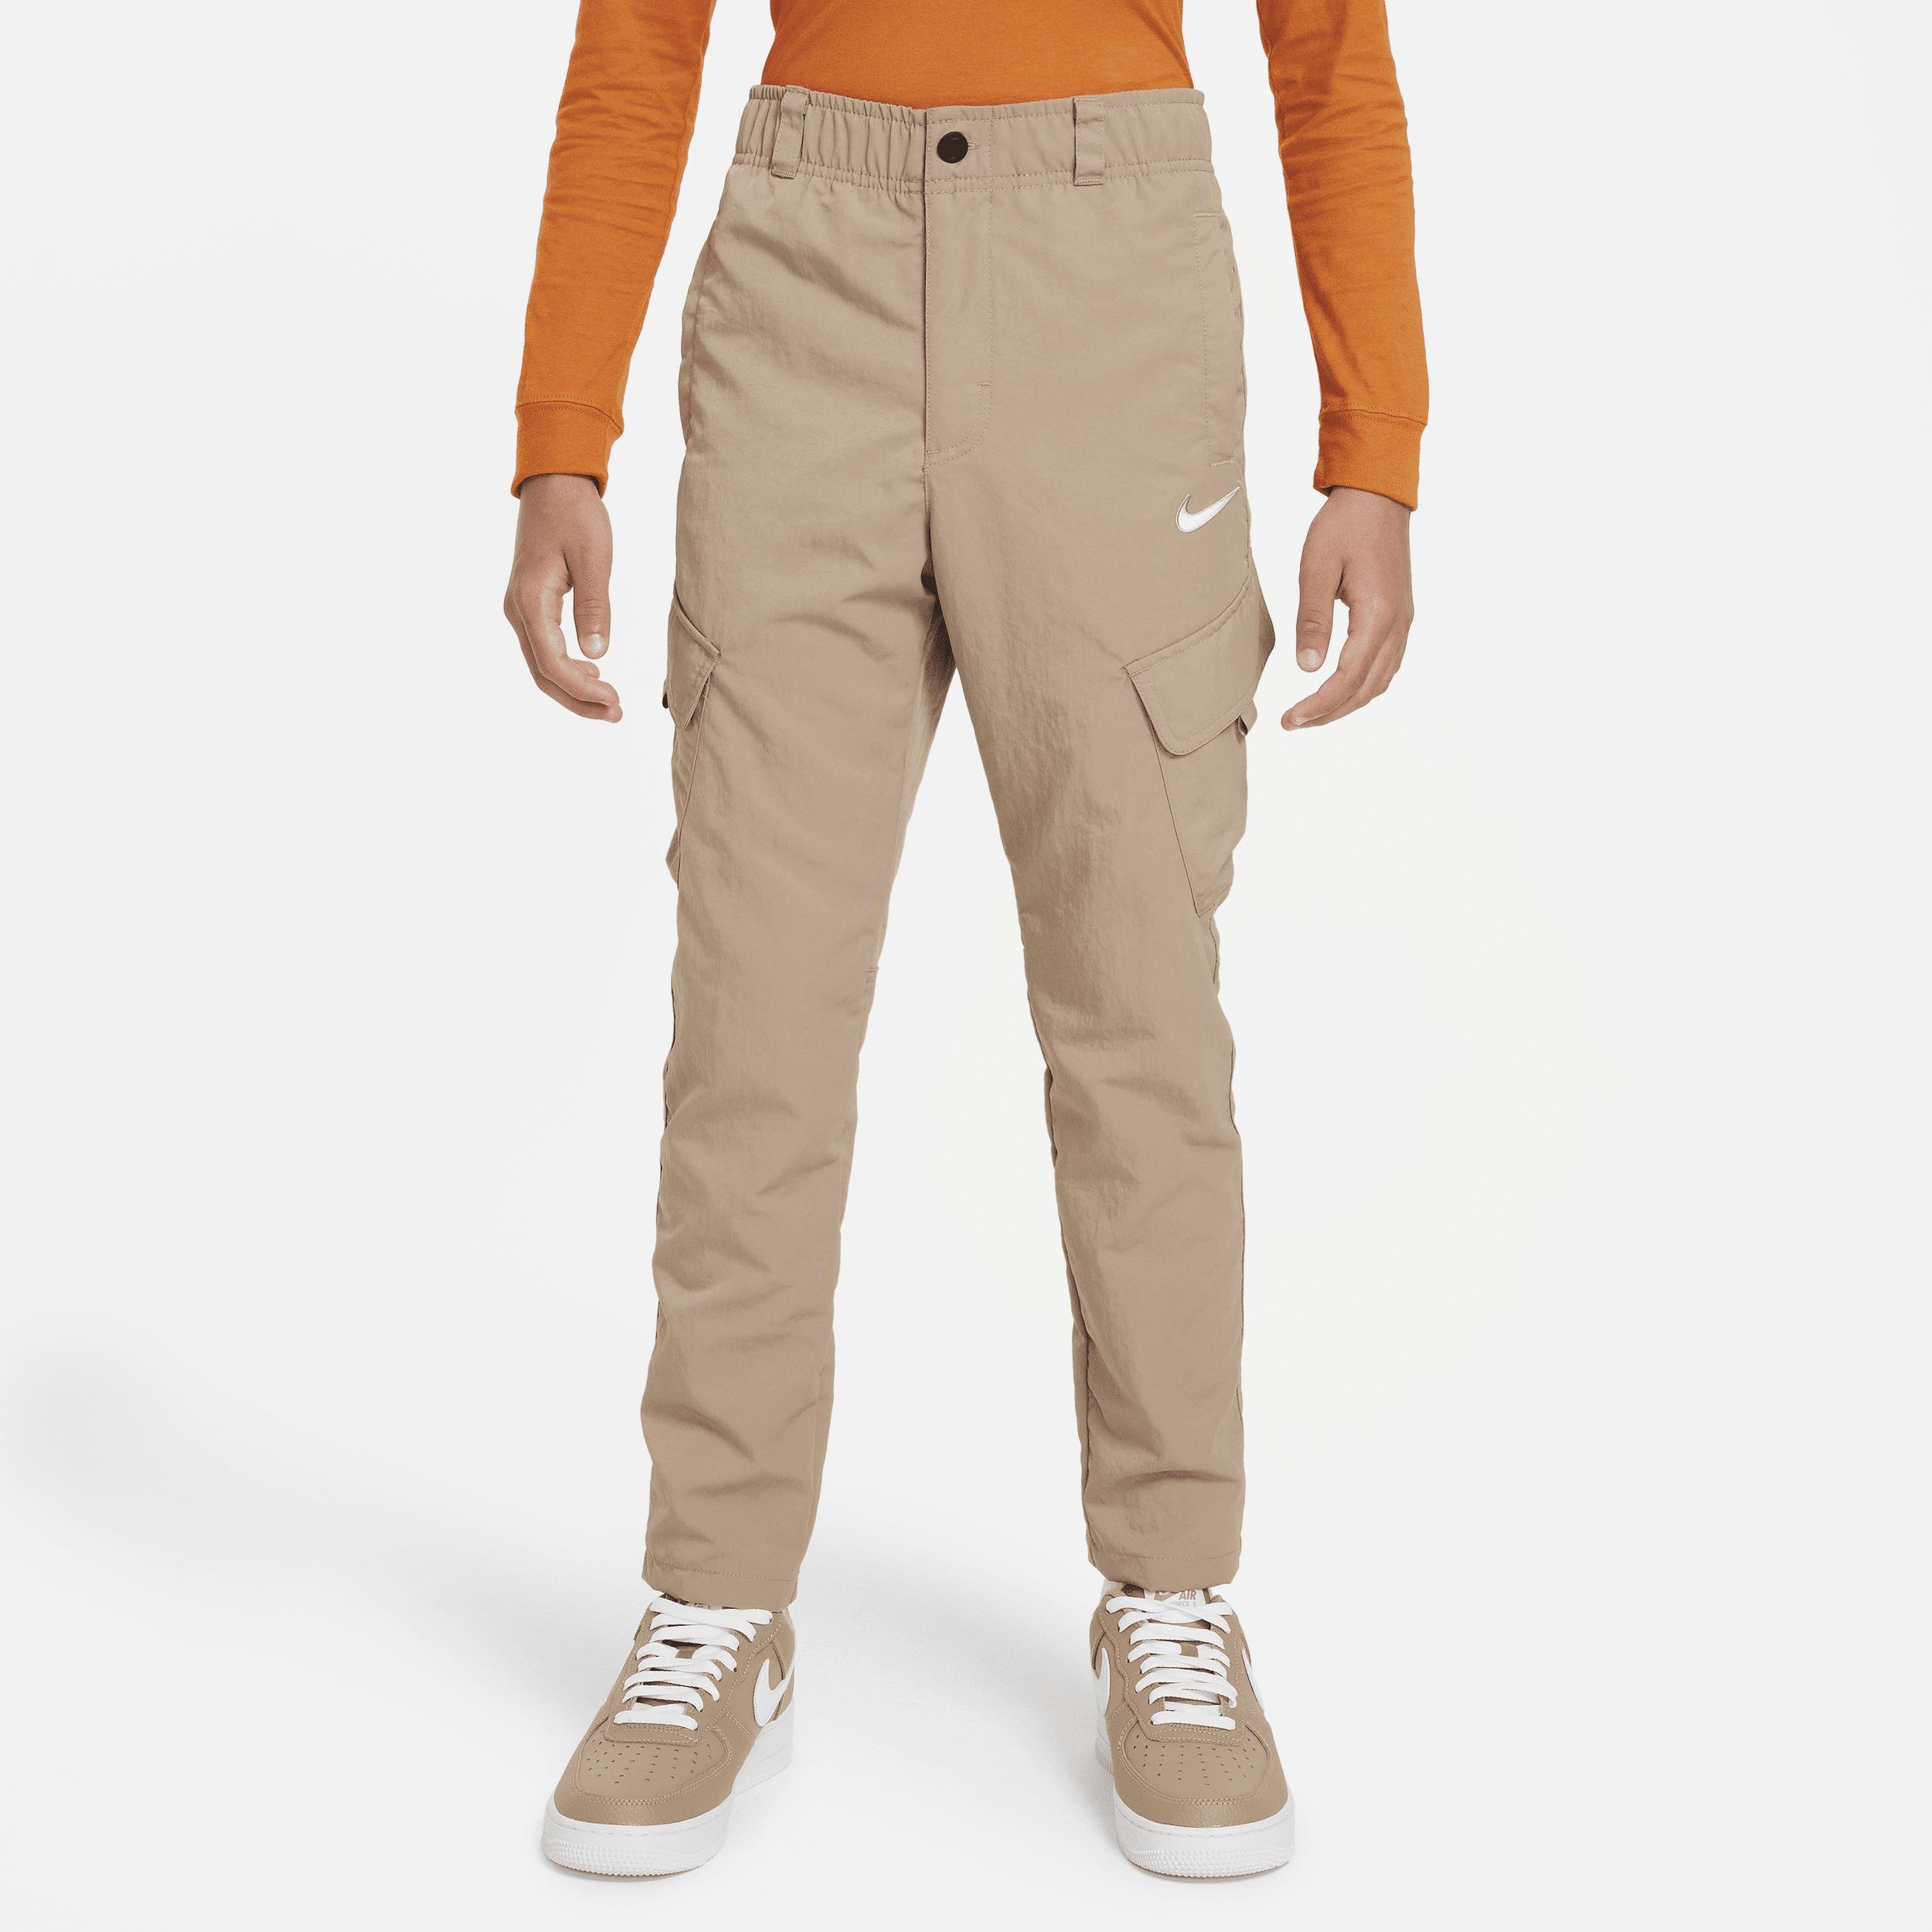 Nike Outdoor Play Big Kids' Woven Cargo Pants by NIKE